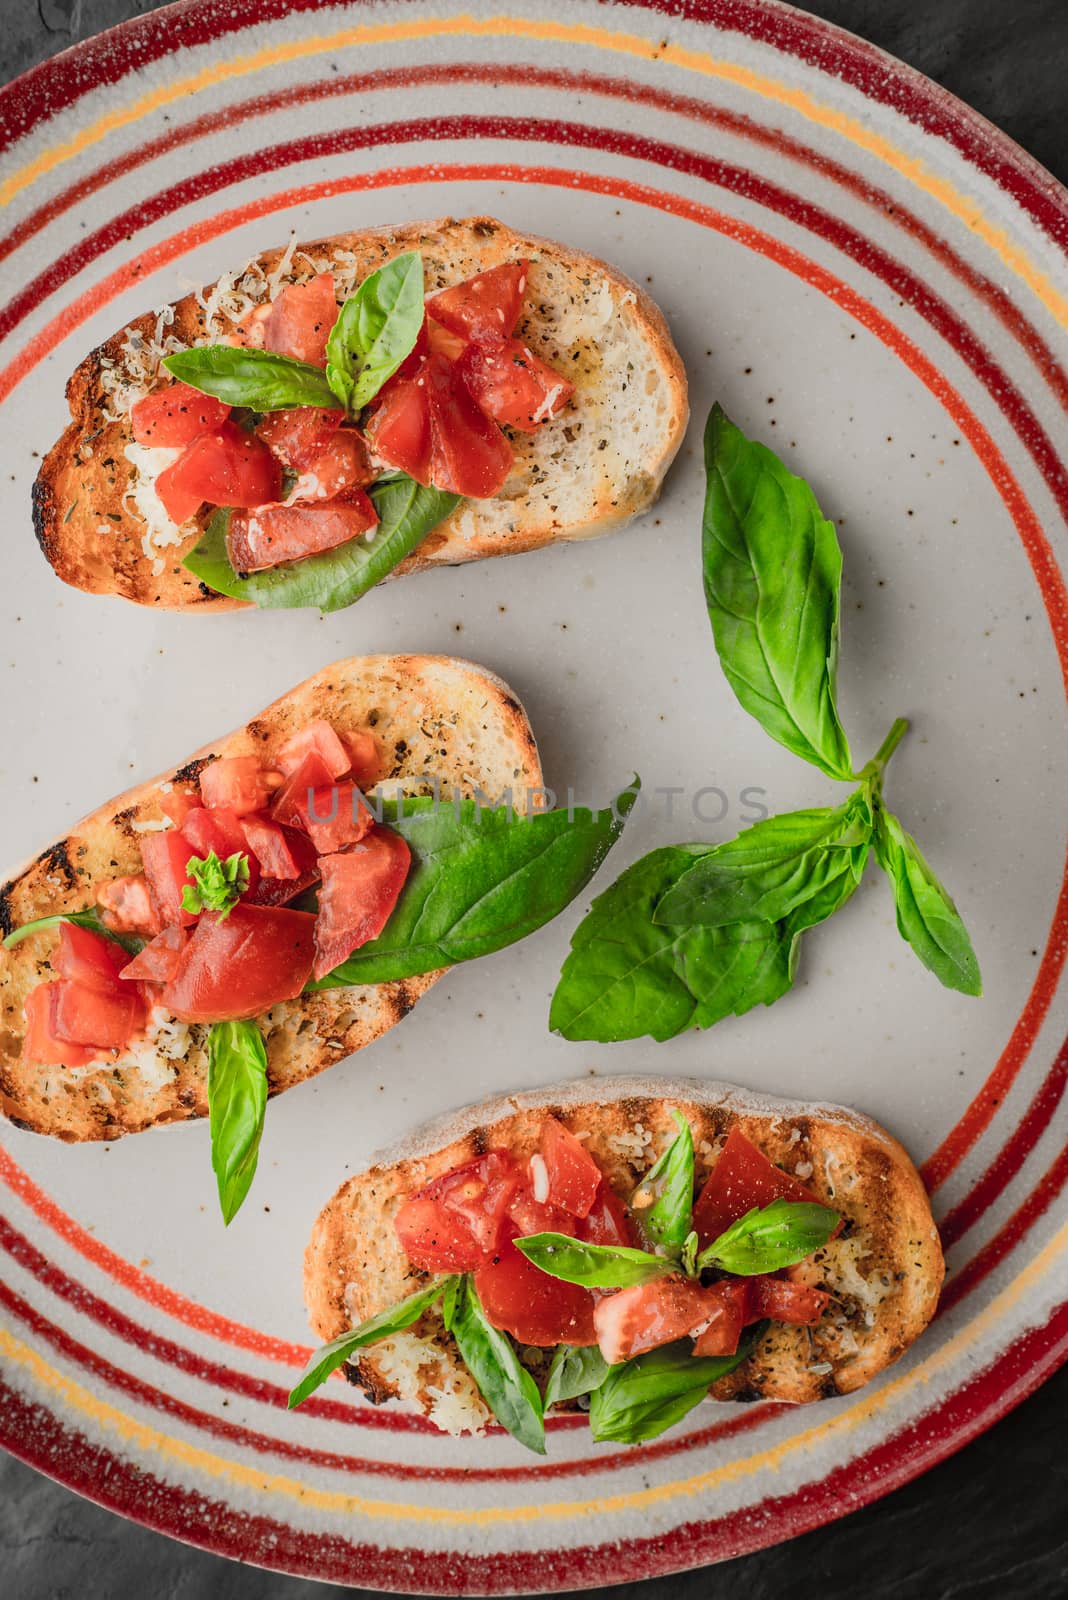 Bruschetta with tomatoes and basil on the colorful ceramic plate